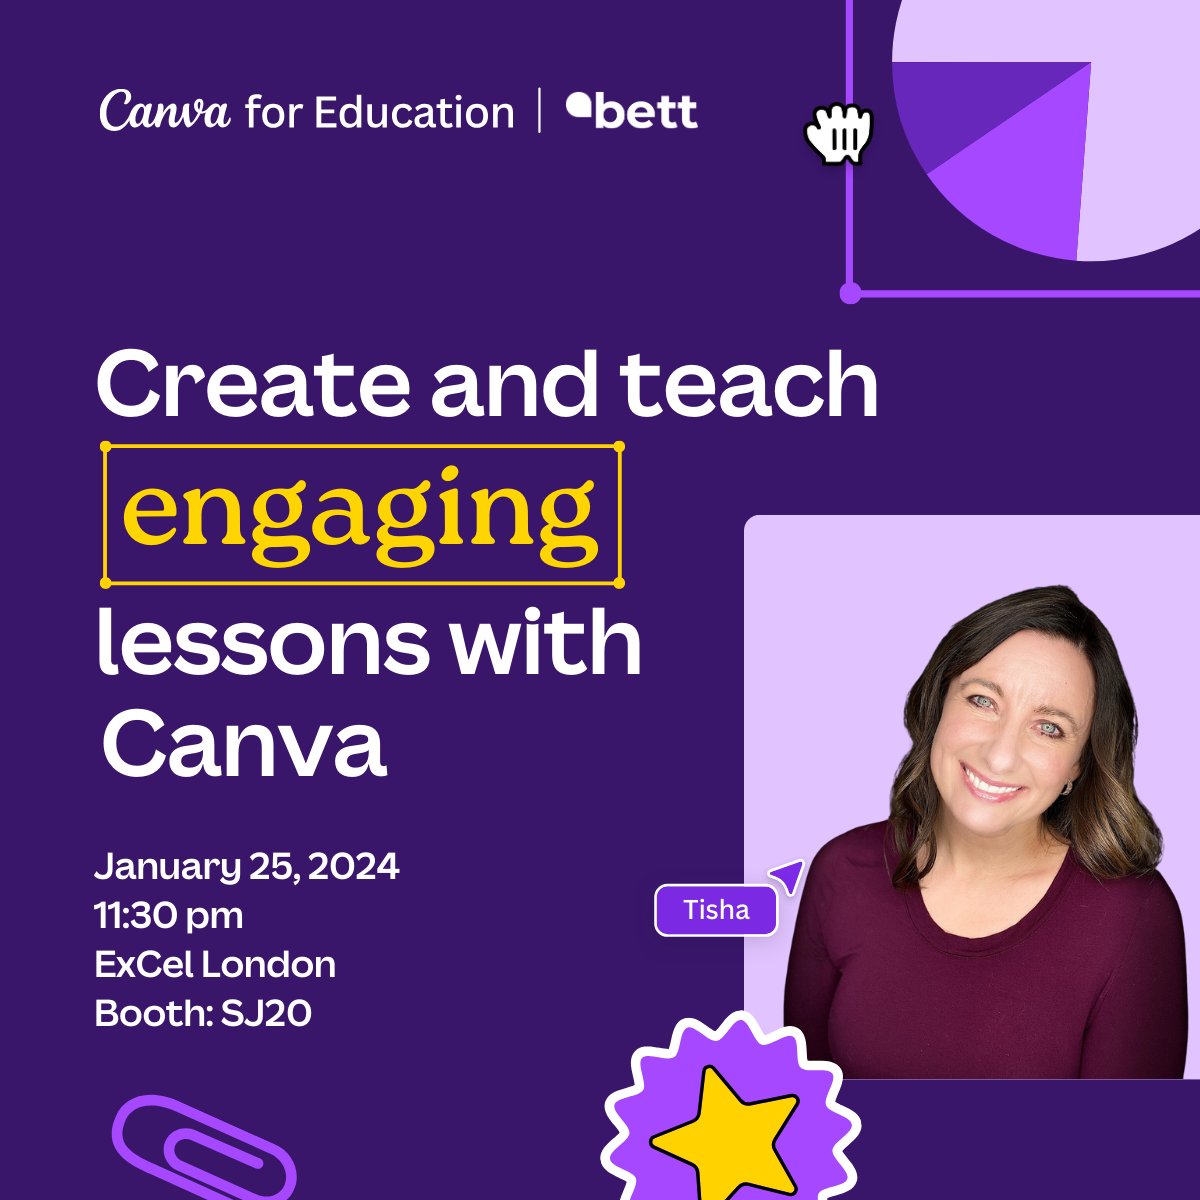 More engaging presentations in the Canva Classroom at #BETT2024! Learn how Canva is being used in the classroom and how to create and teach engaging lessons. #CanvaEDU